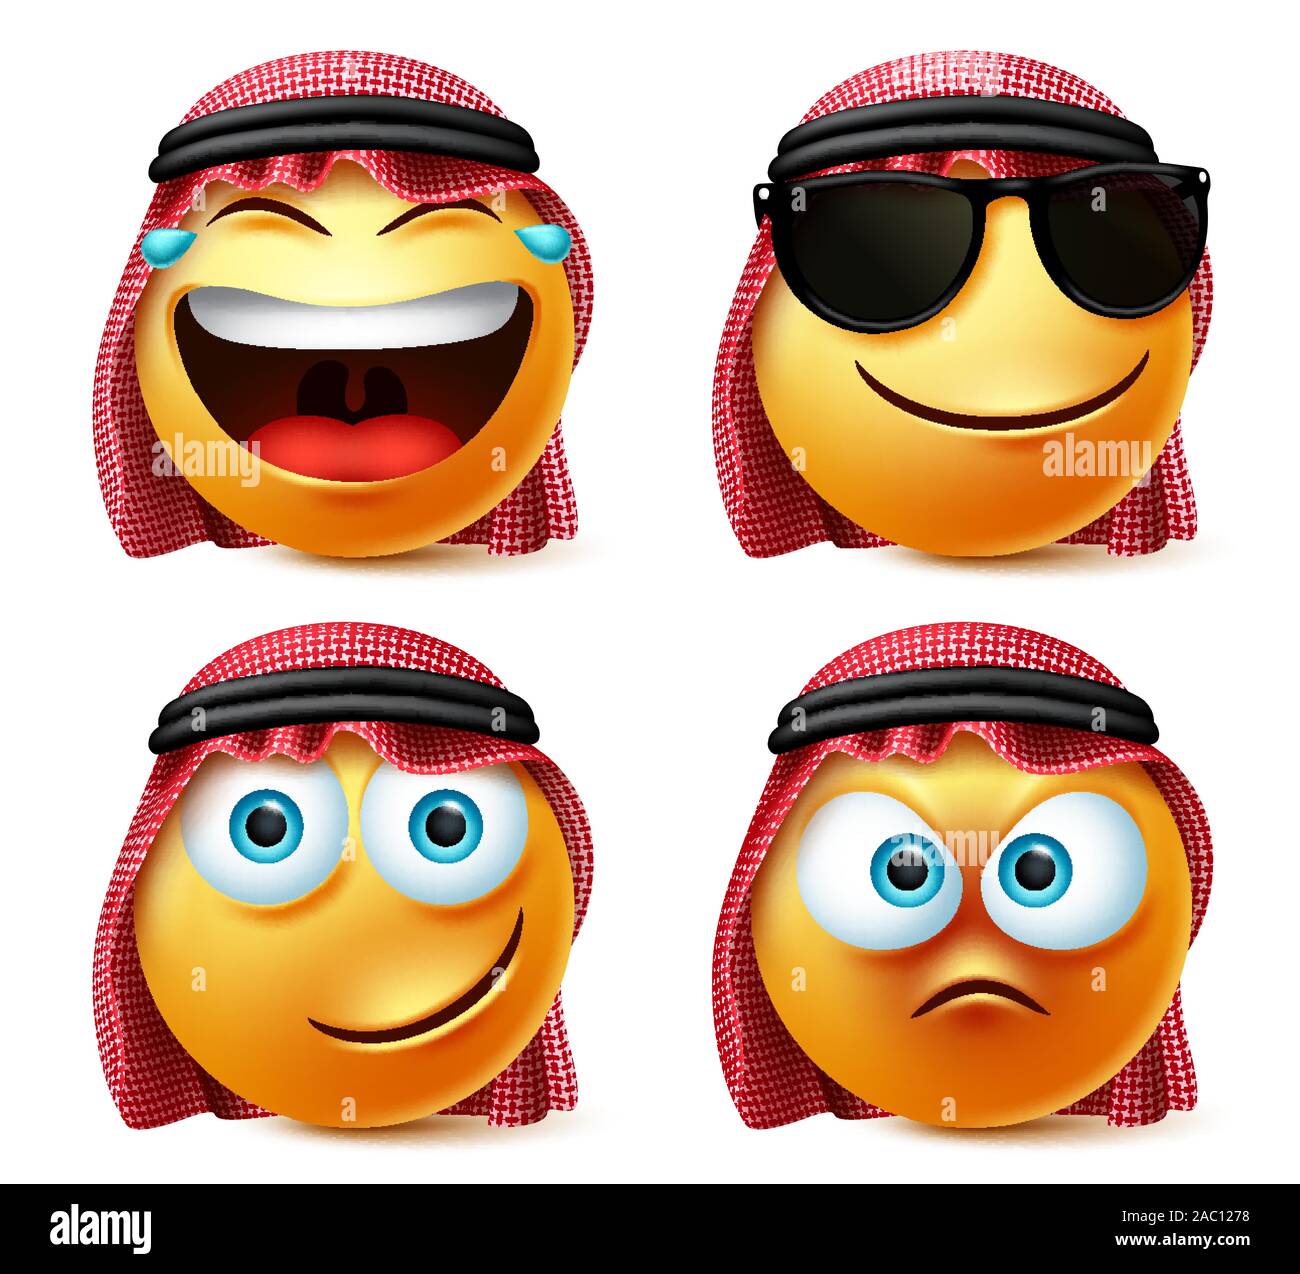 Saudi arab smiley vector set. Emotions or emoji of saudi arabian man face in laughing, naughty and happy facial expression with thobe and glasses. Stock Vector